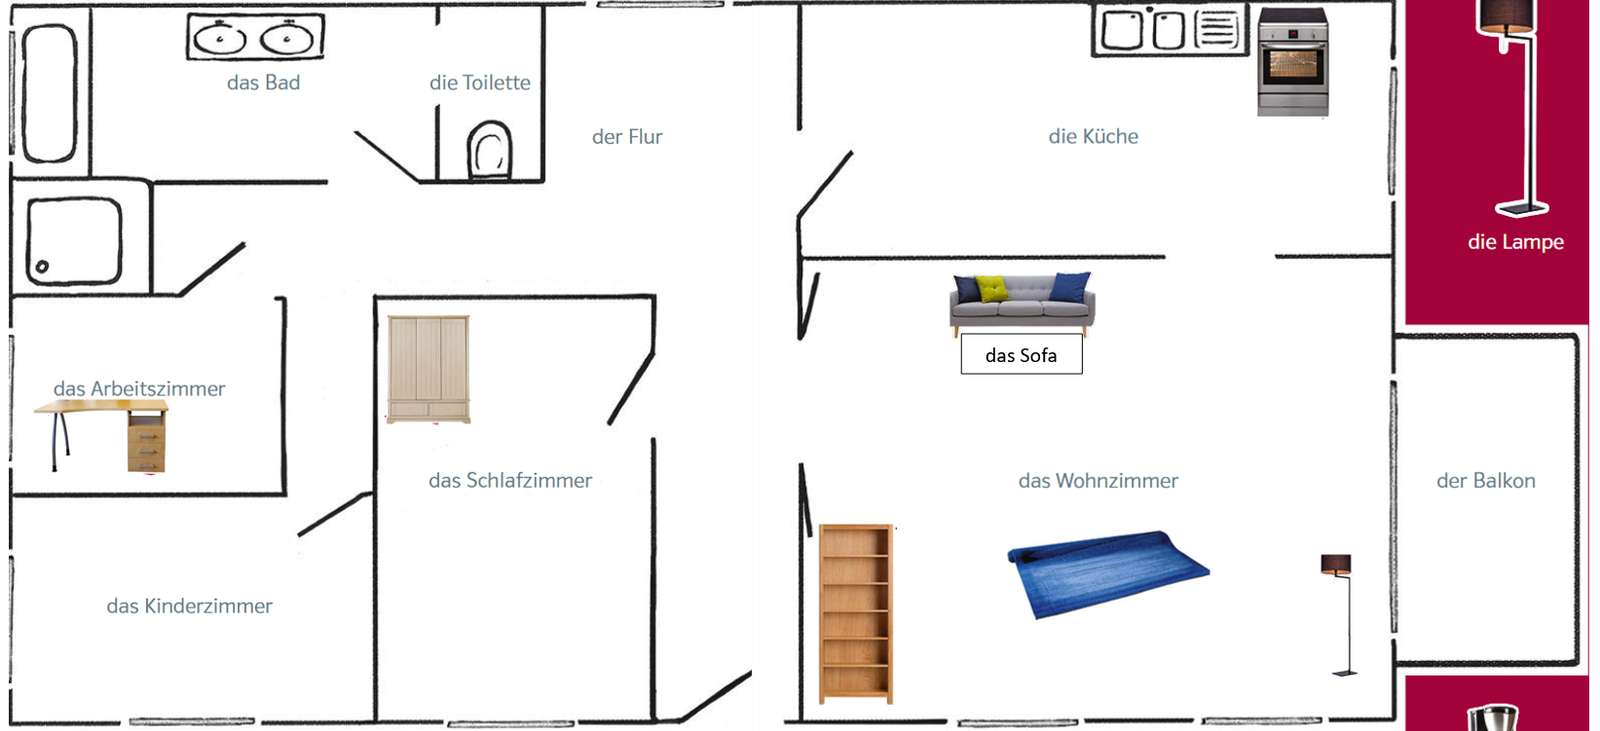 Wohnung- puzzle online from photo